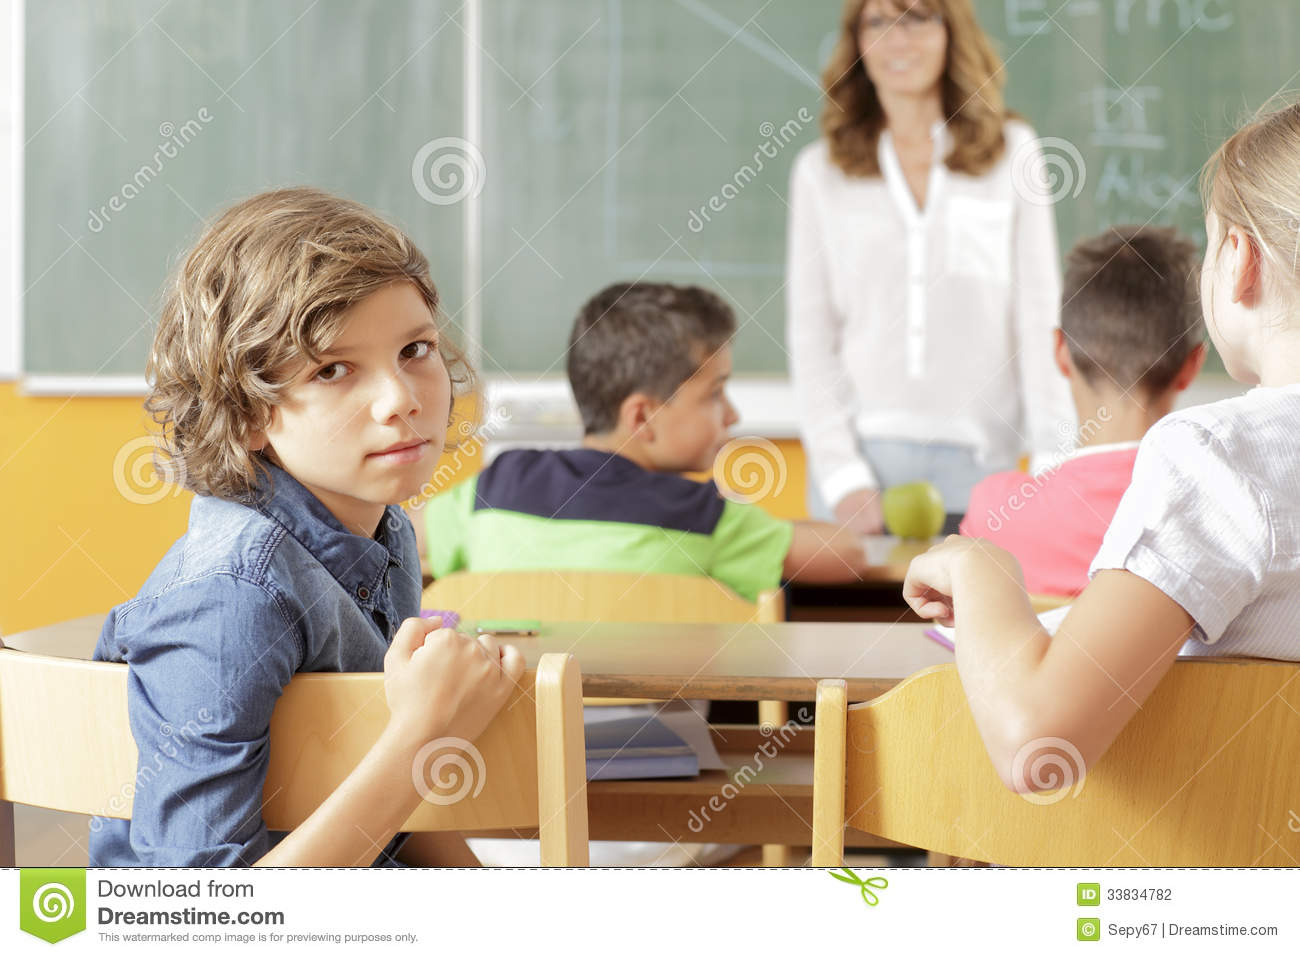 Student Portrait In The Classroom Stock Photography   Image  33834782